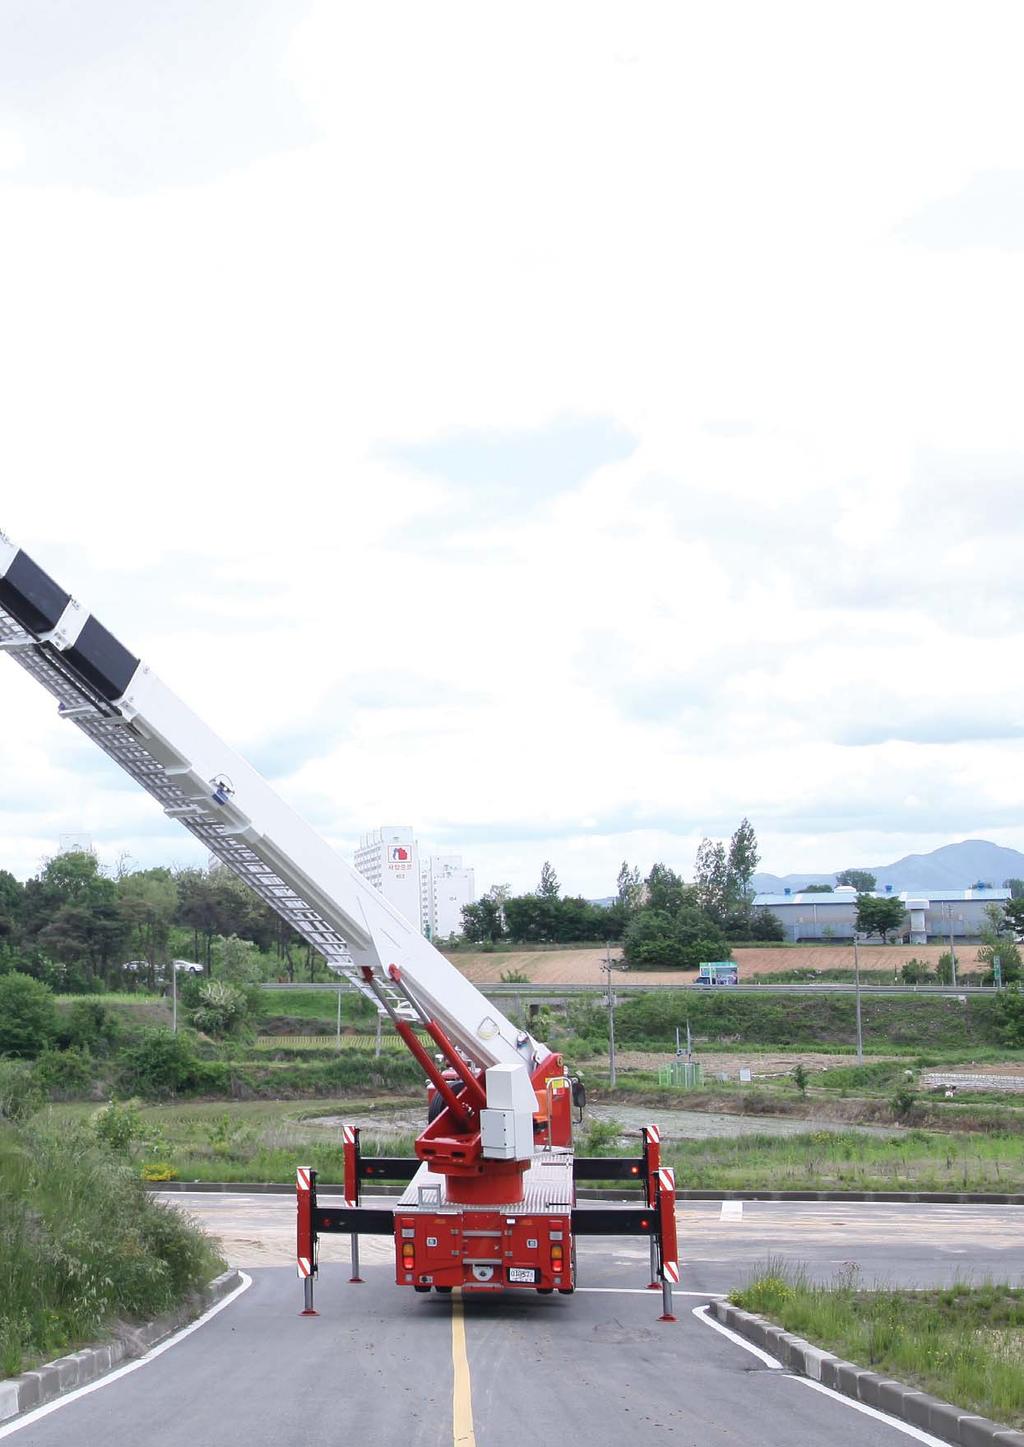 3 CHALLENGING THE HEIGHT! EVERYTHING IS REACHABLE! The EVERDIGM Aerial Platform is designed for effective rescue and fire fighting in high rise buildings on fire.